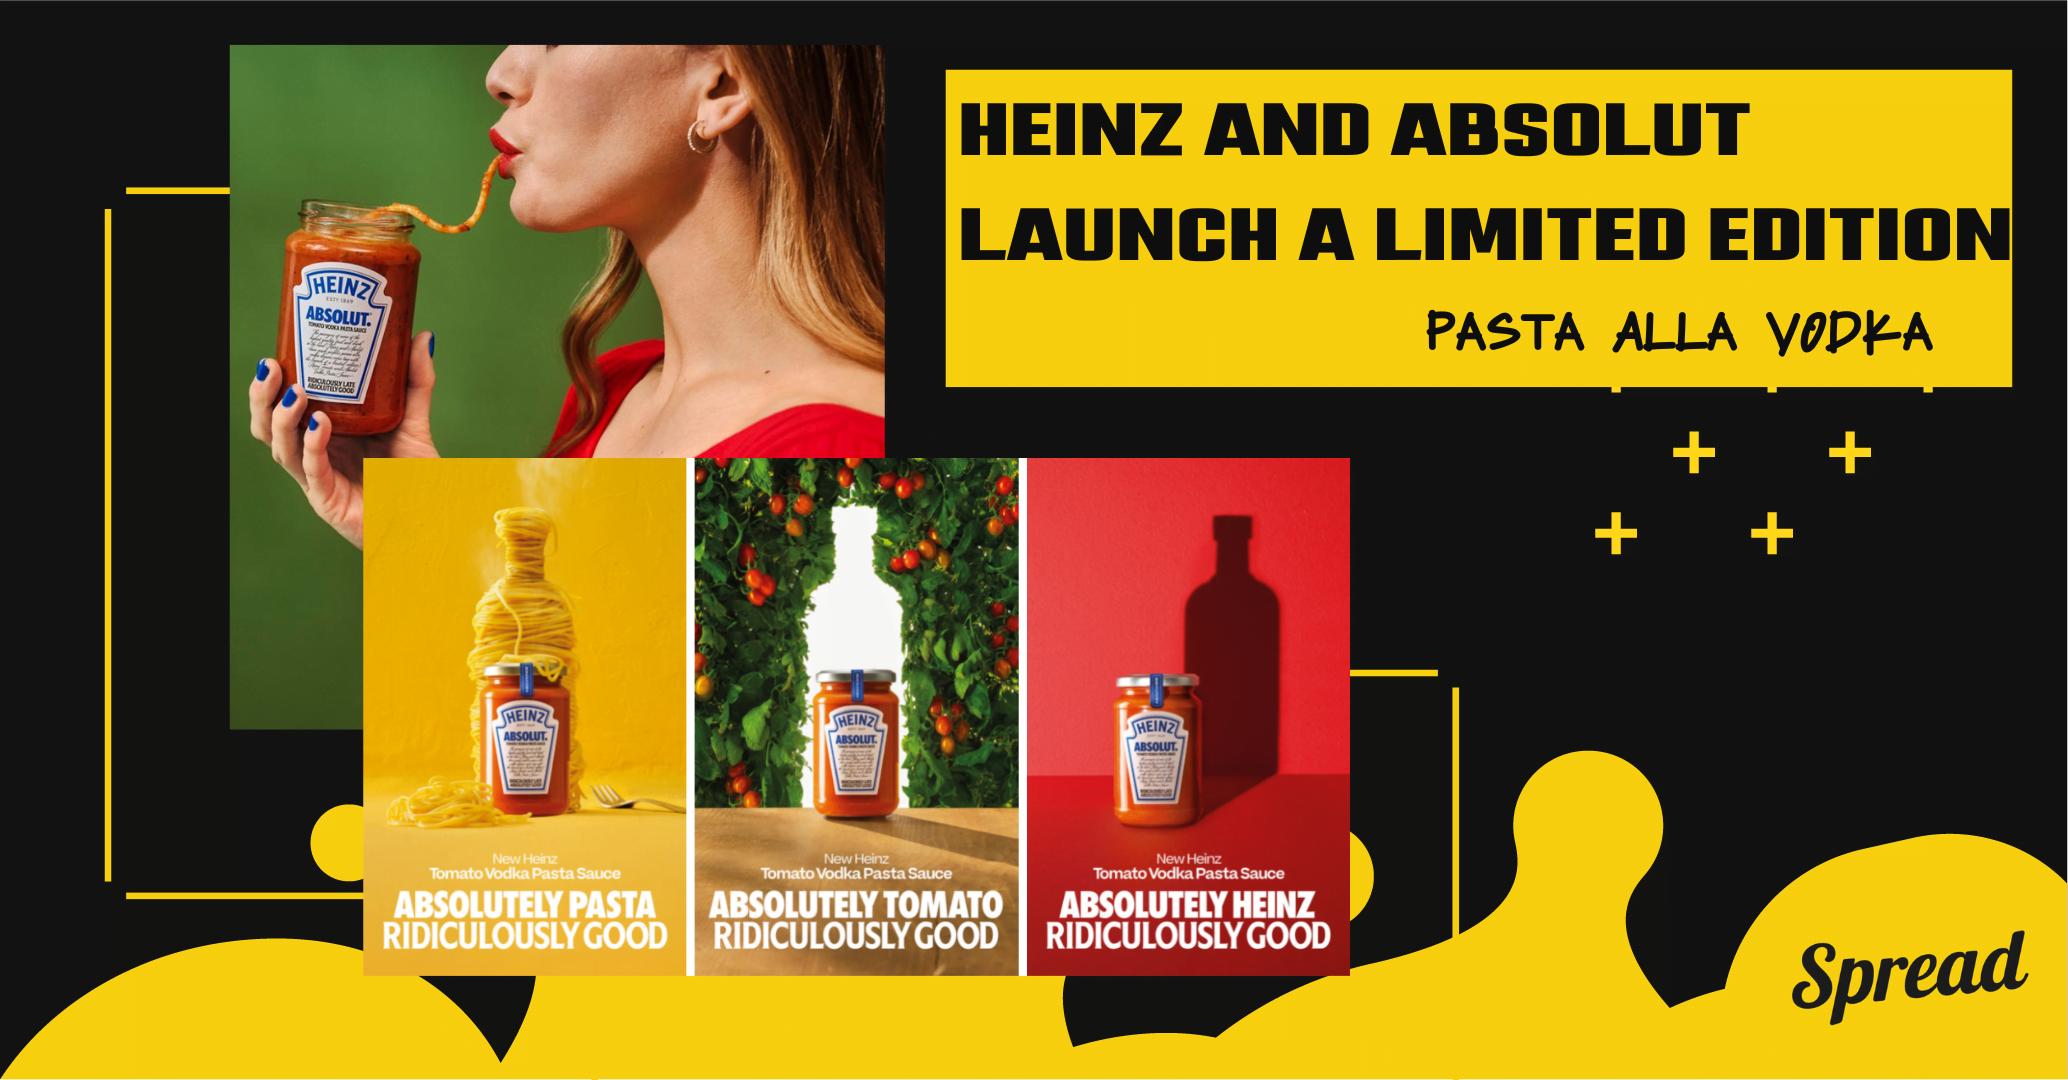 Heinz and Absolut